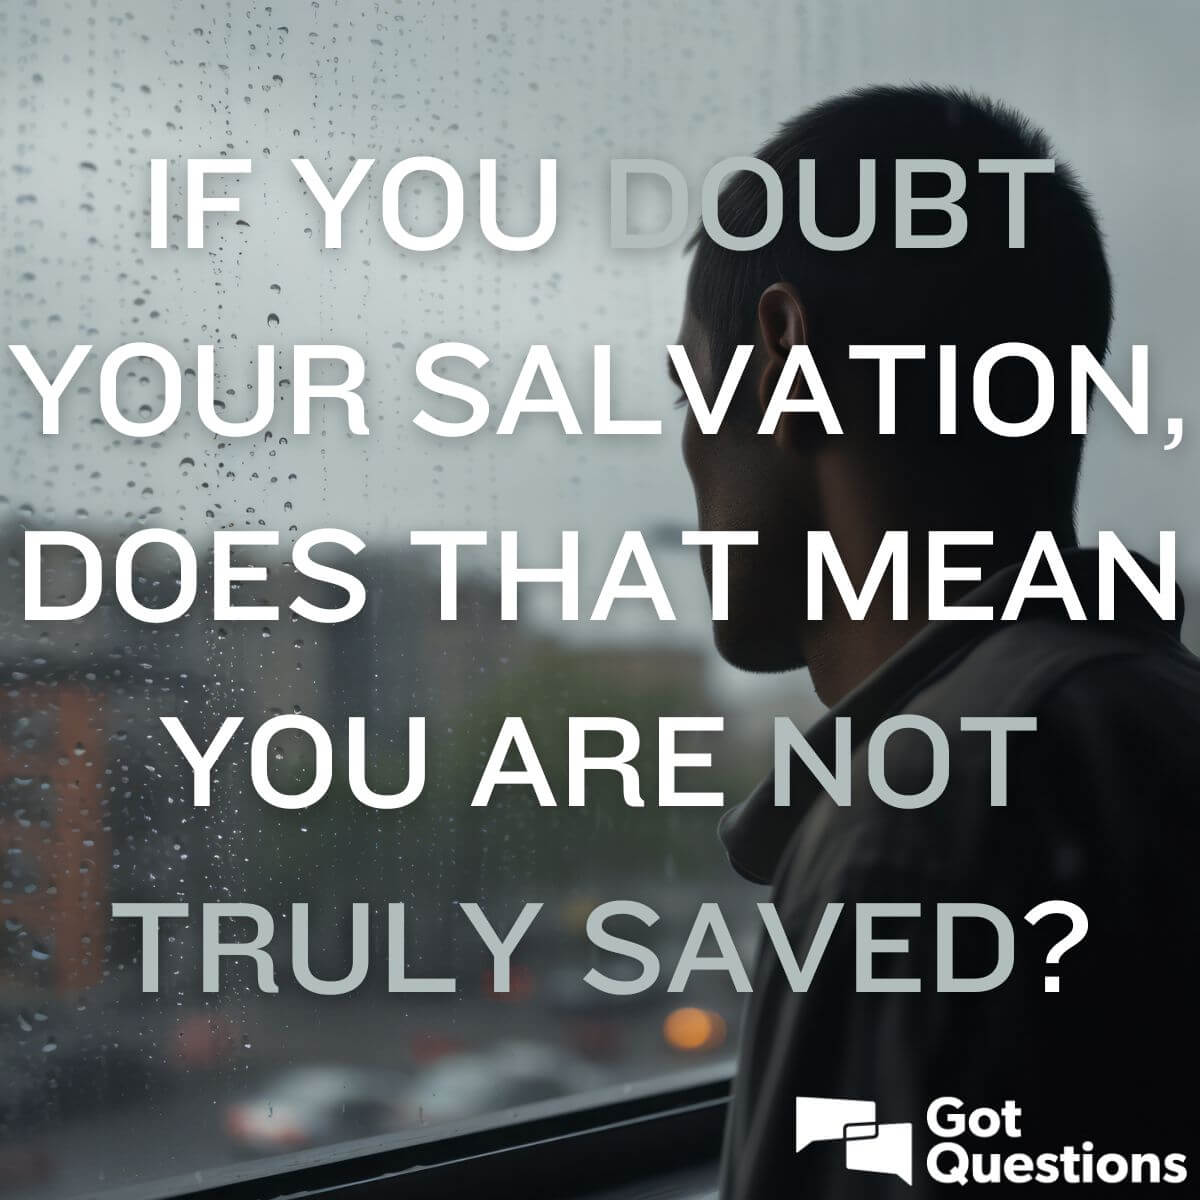 If you doubt your salvation, does that mean you are not ...